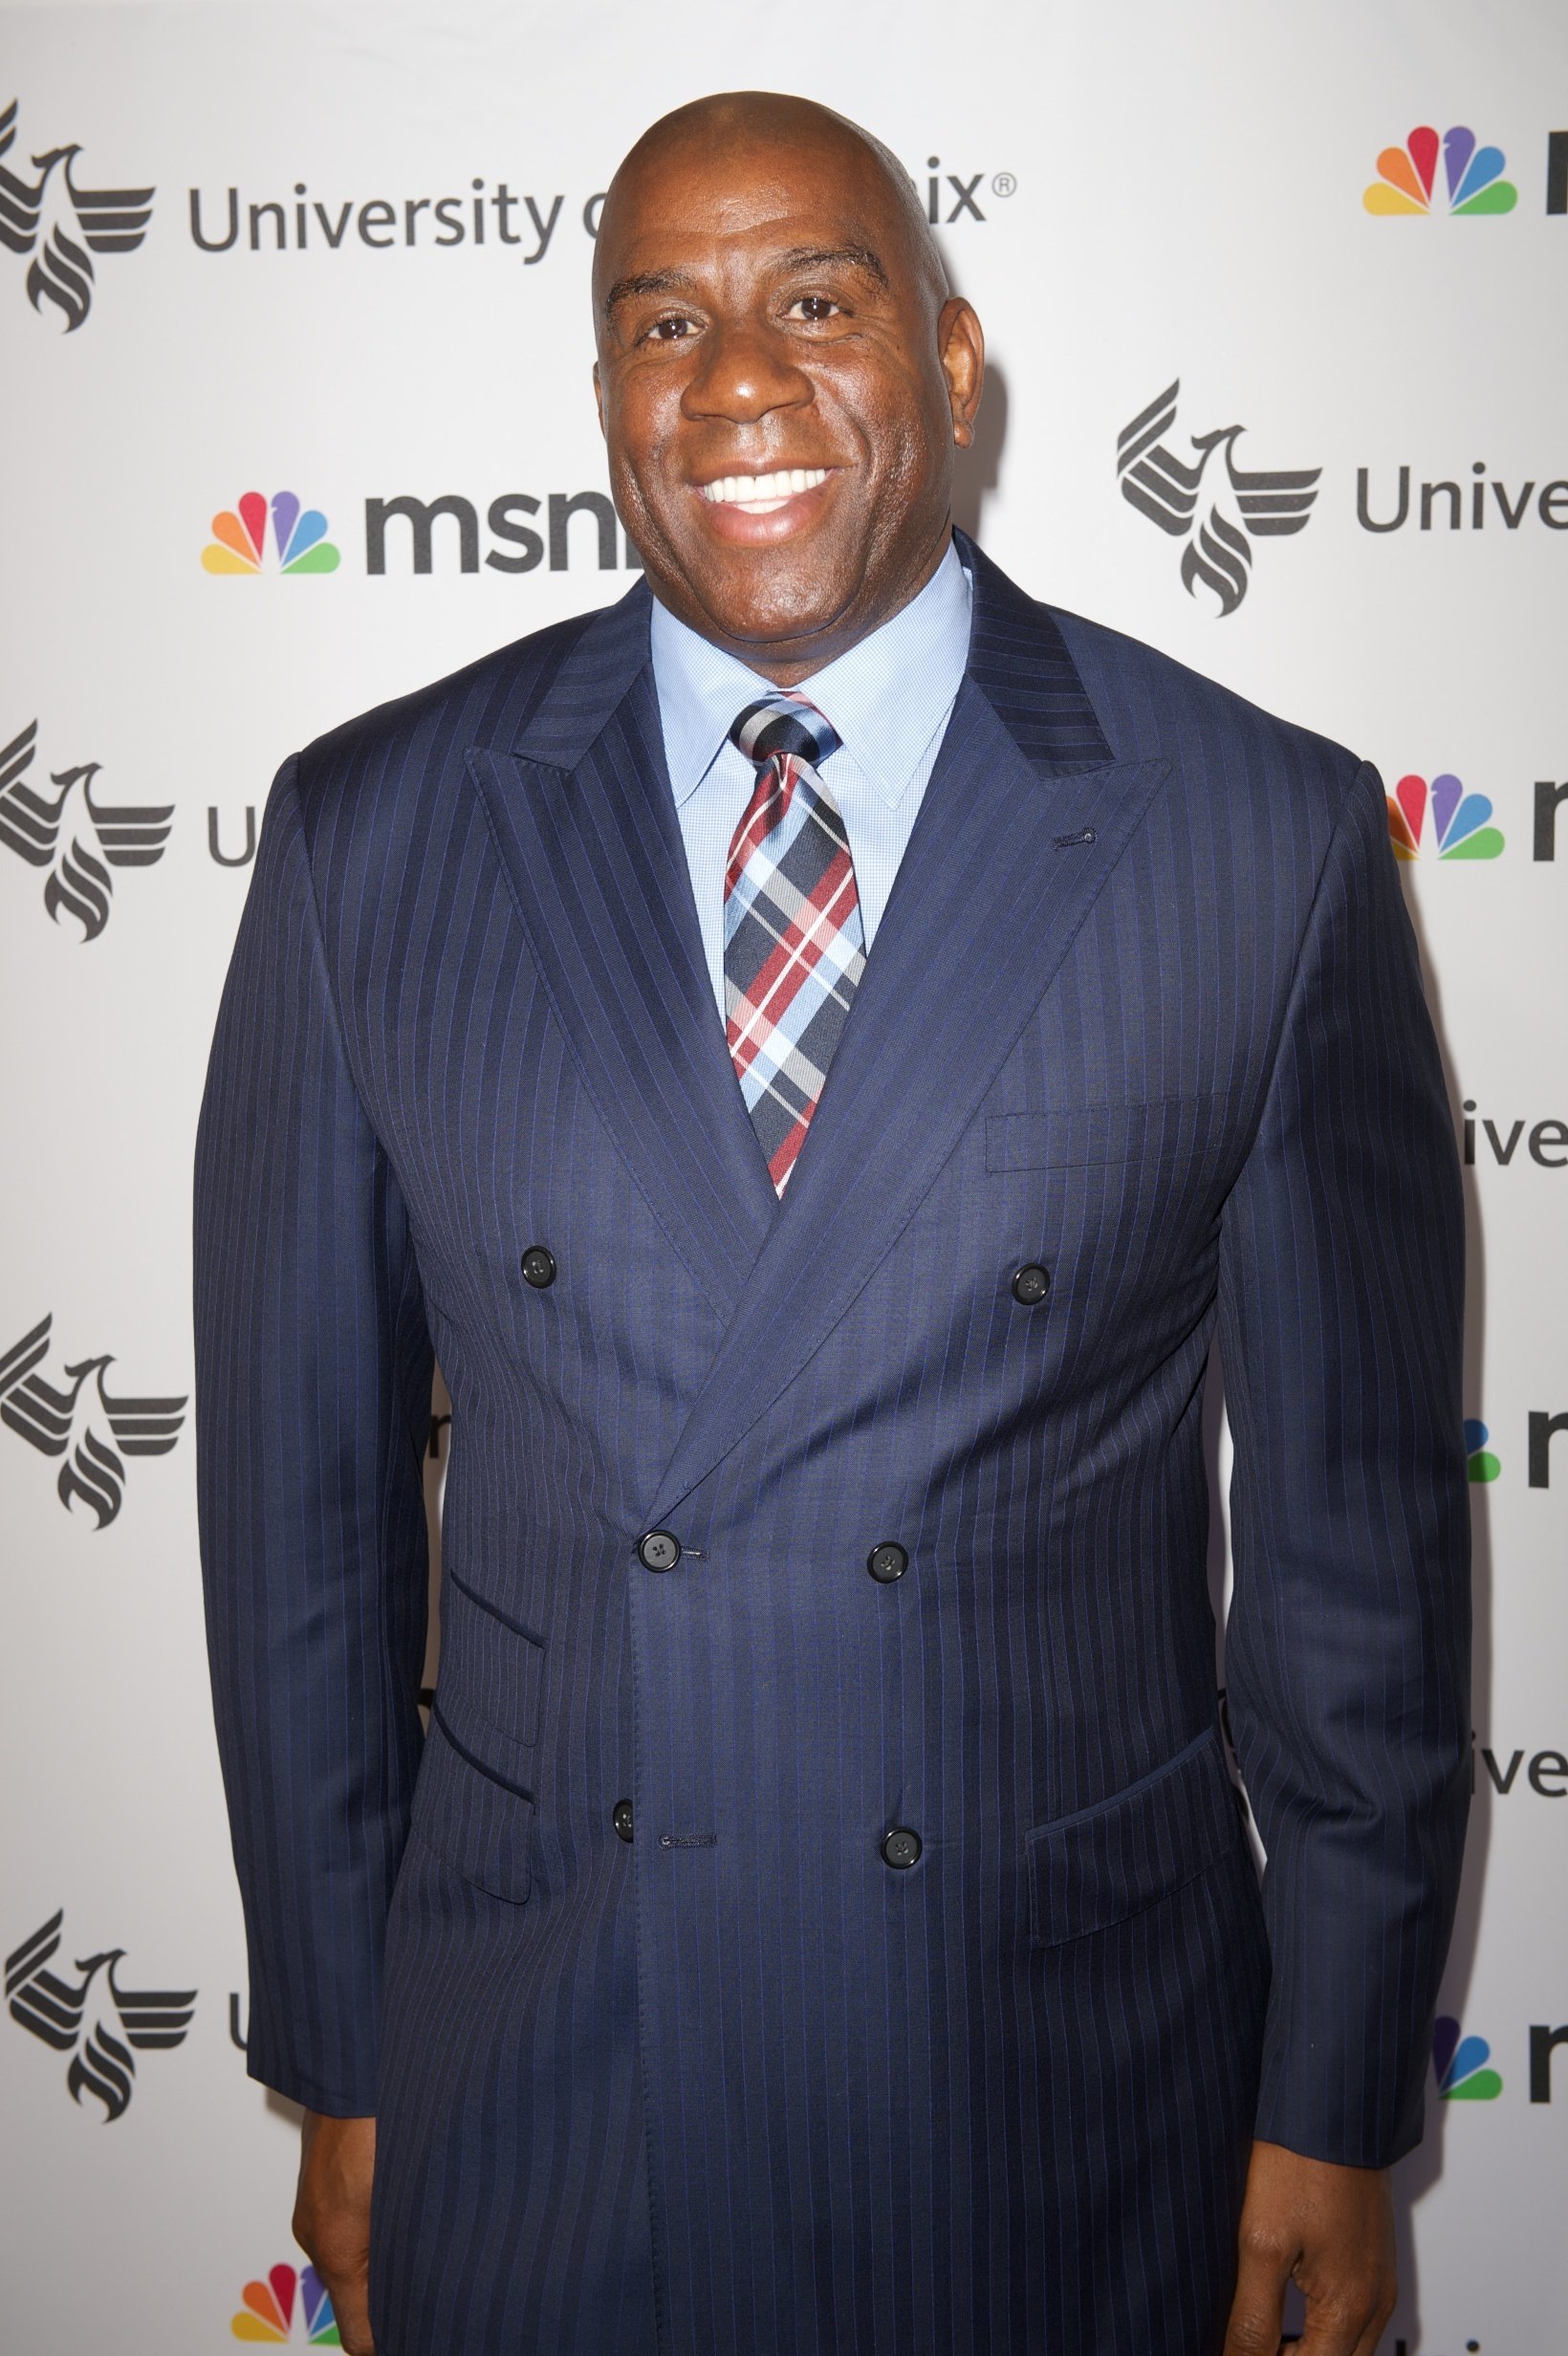 Ervin "Magic" Johnson attends the "Advancing The Dream" Live at The Apollo Theater on September 6, 2013 | Photo: Getty Images